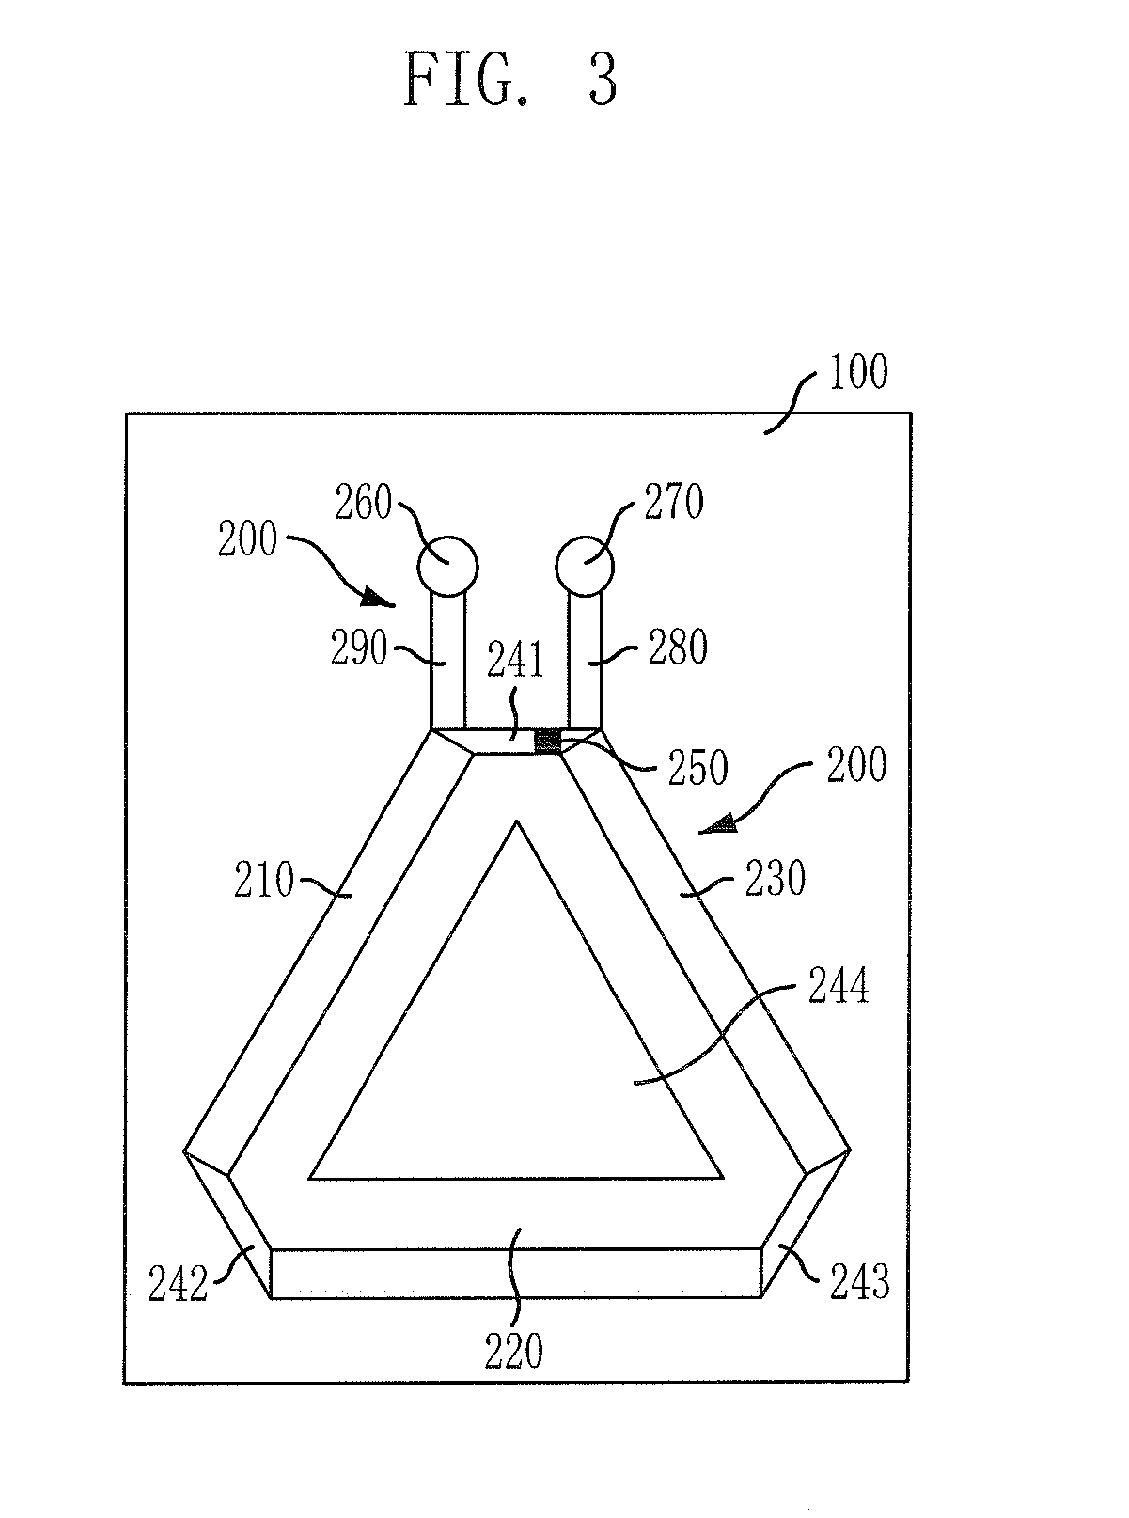 Natural convection-driven PCR apparatus and method using disposable polymer chip